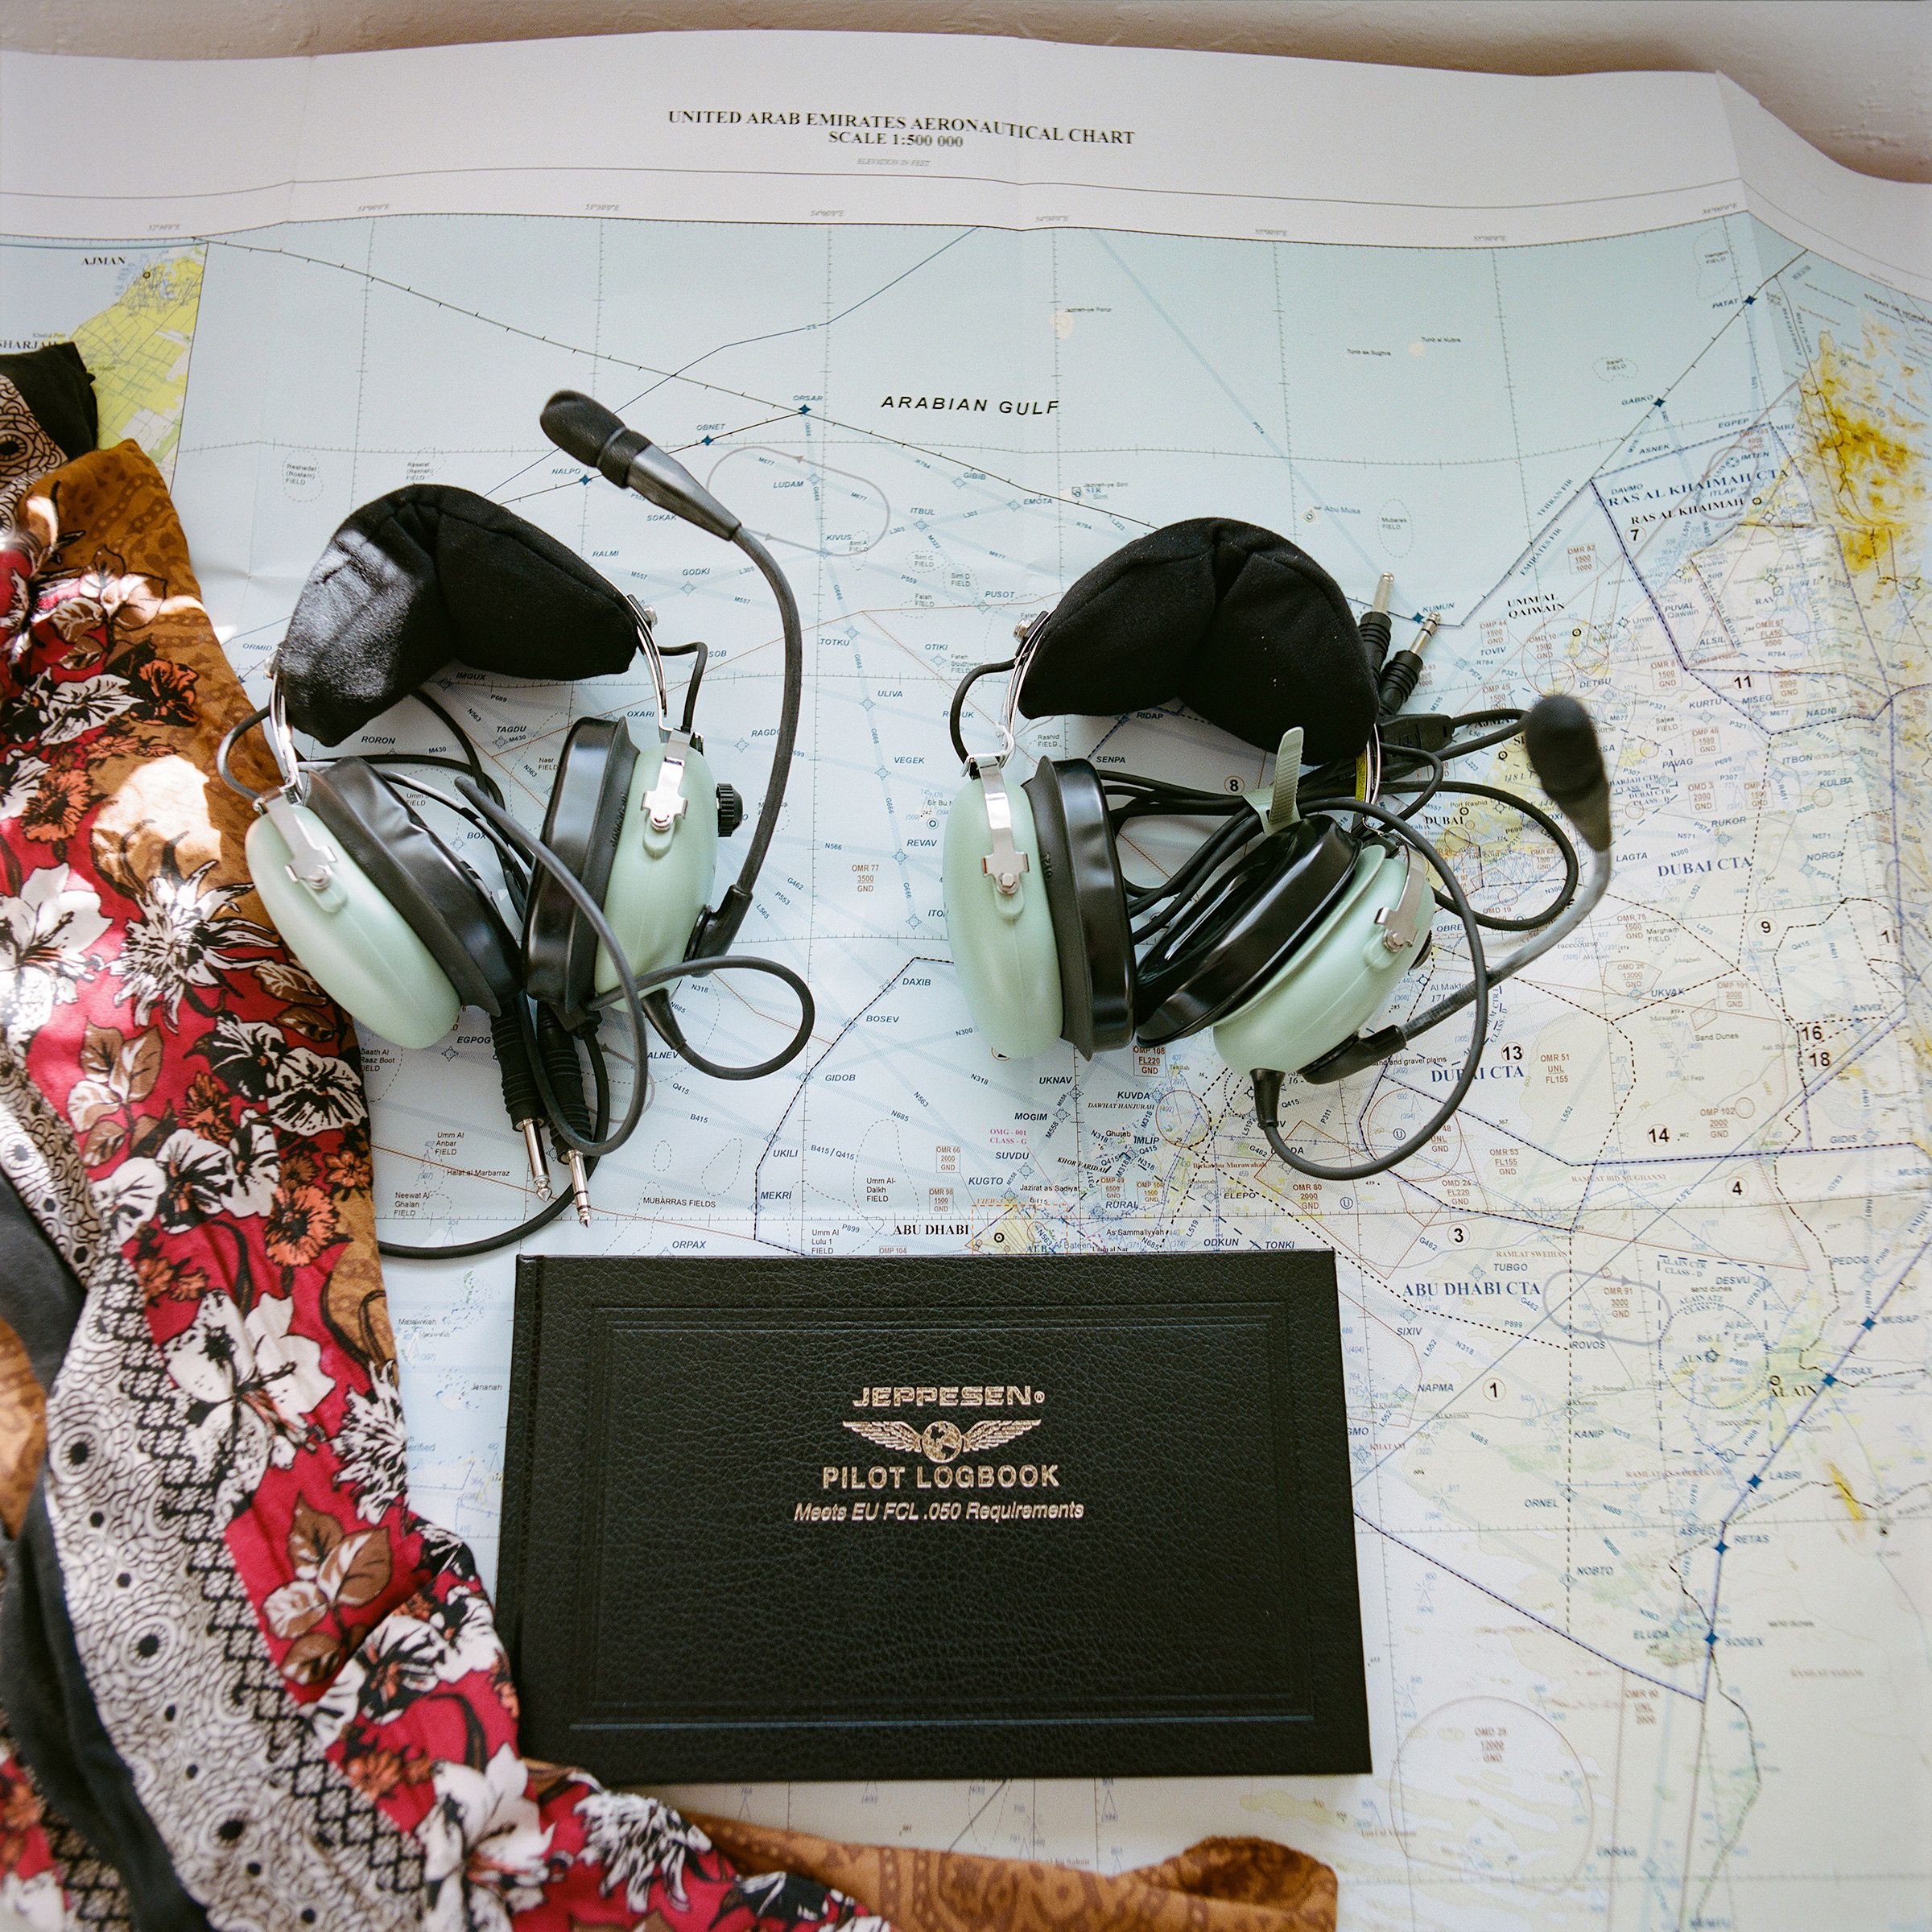 headsets and a pilot logbook